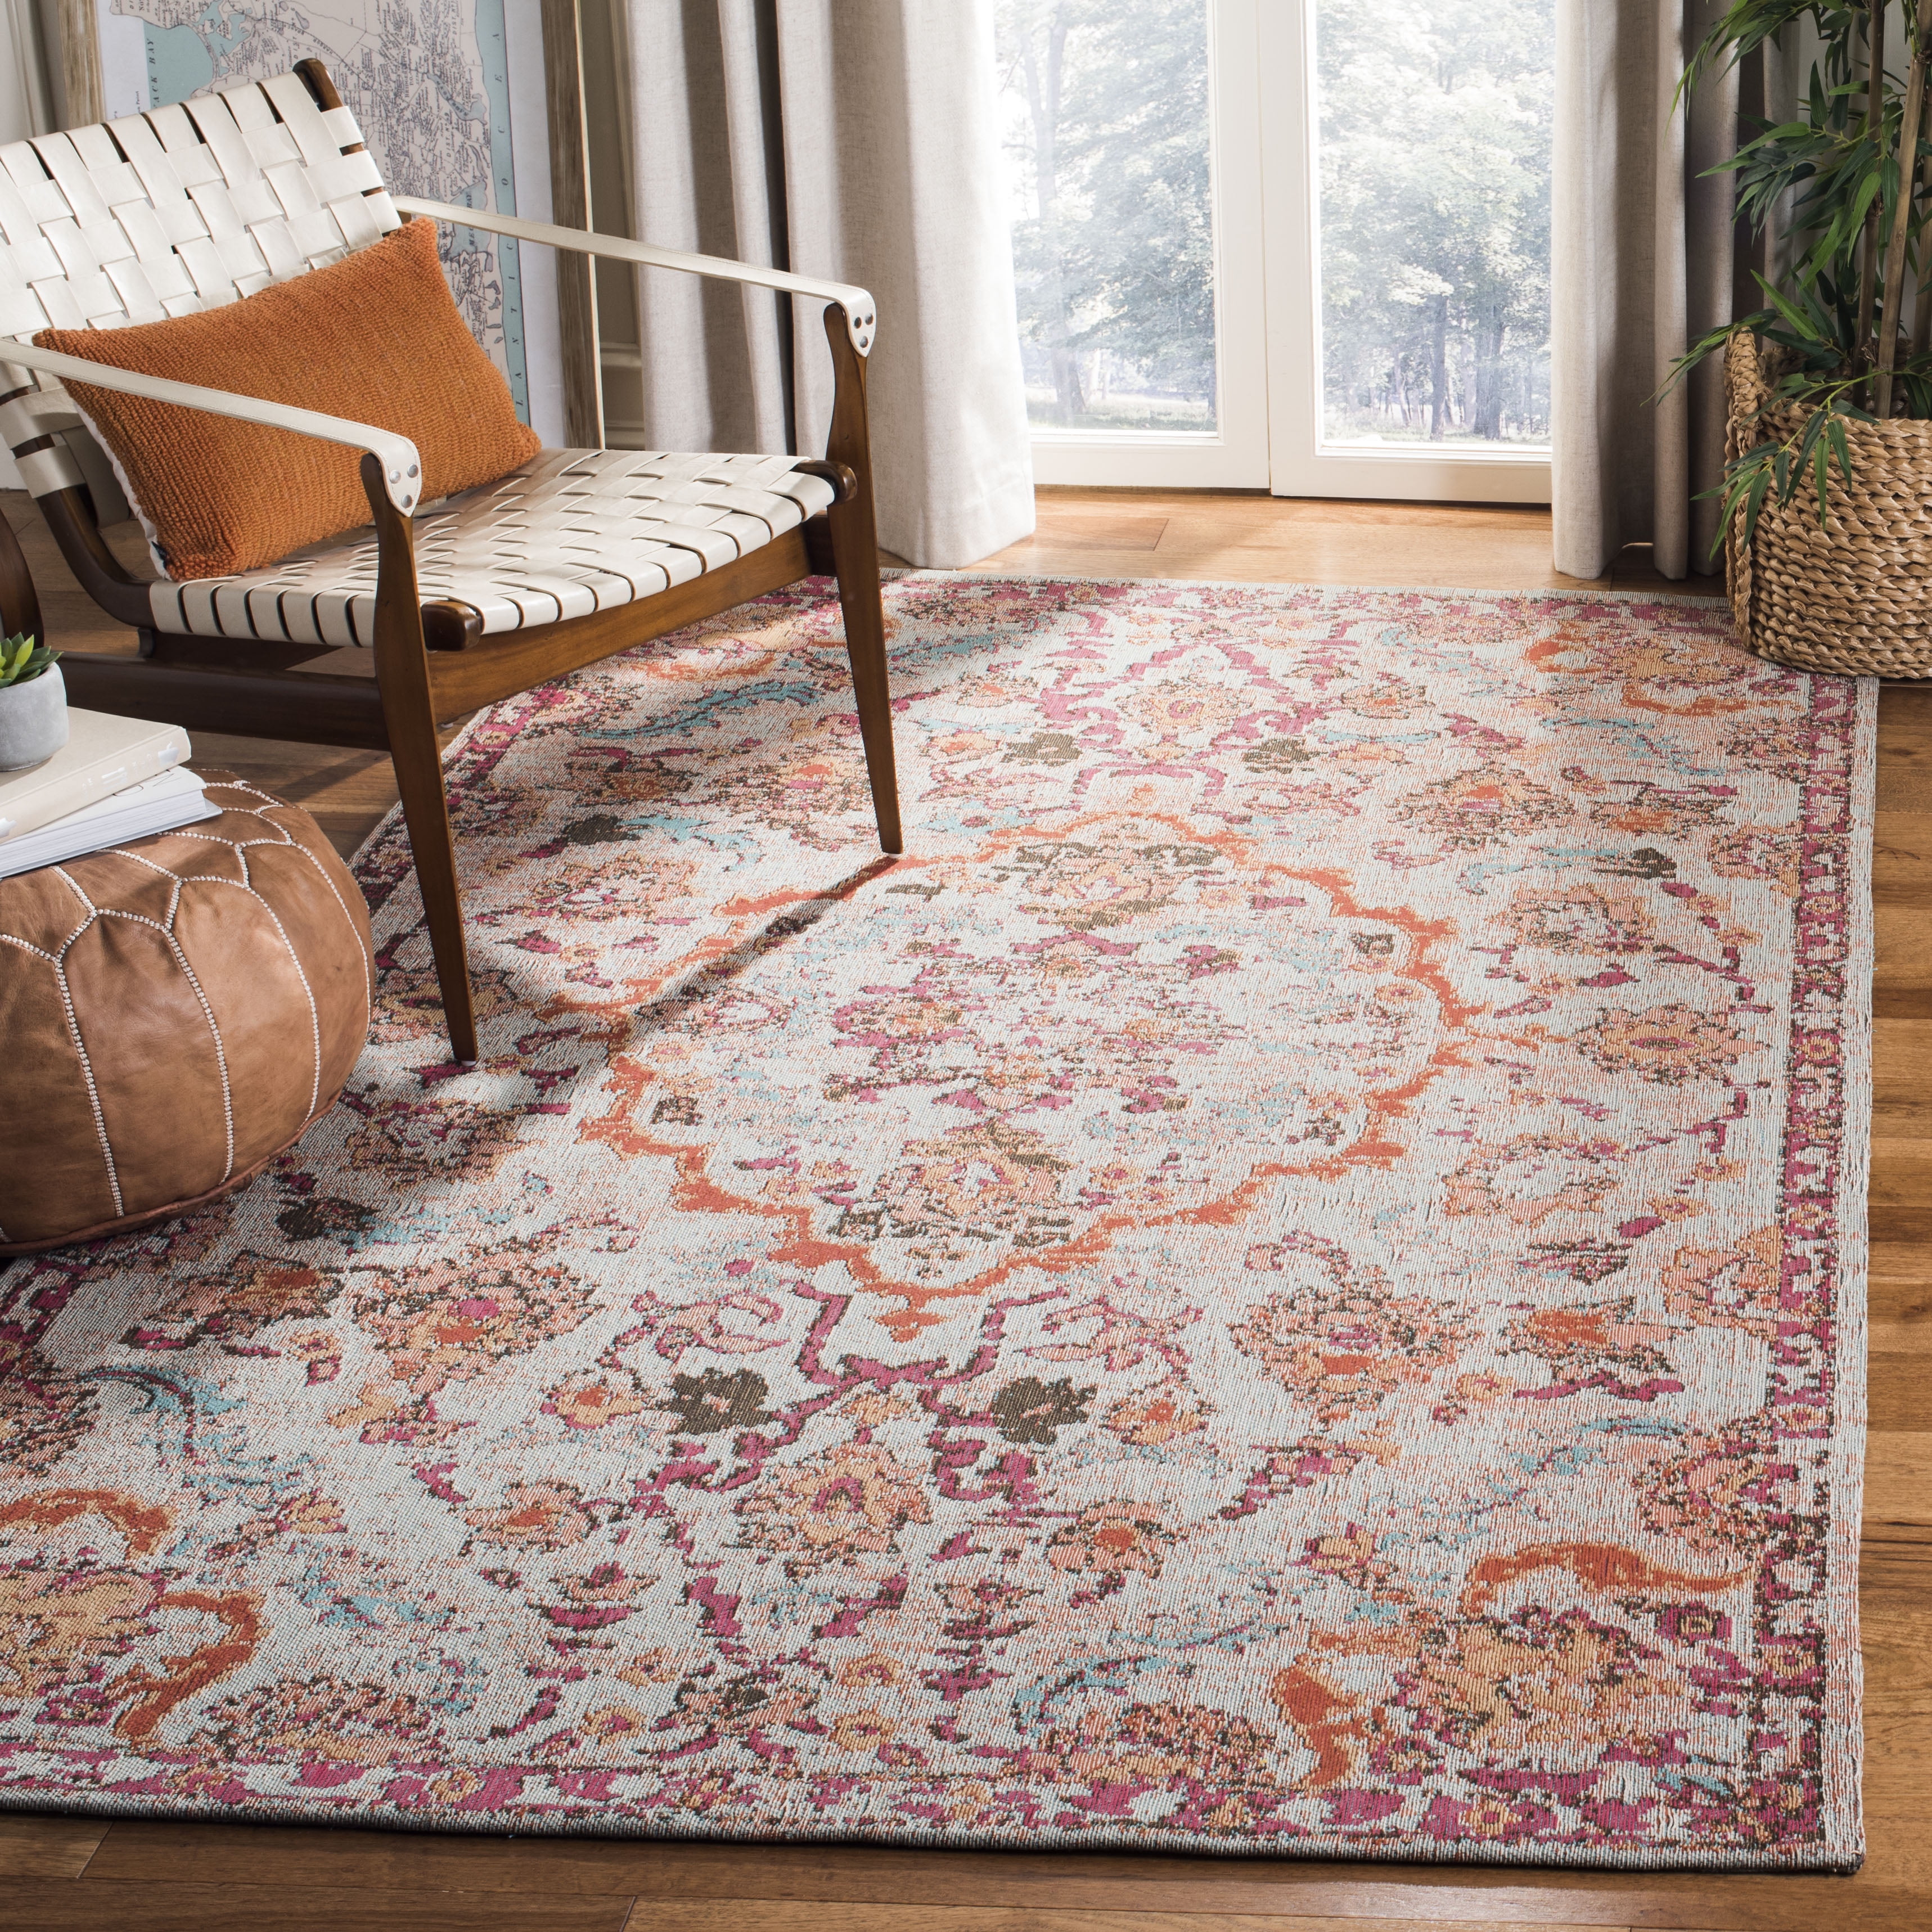 New Classic Red Antique Area Rug Floral Pattern Vintage Design Living Room Rugs 